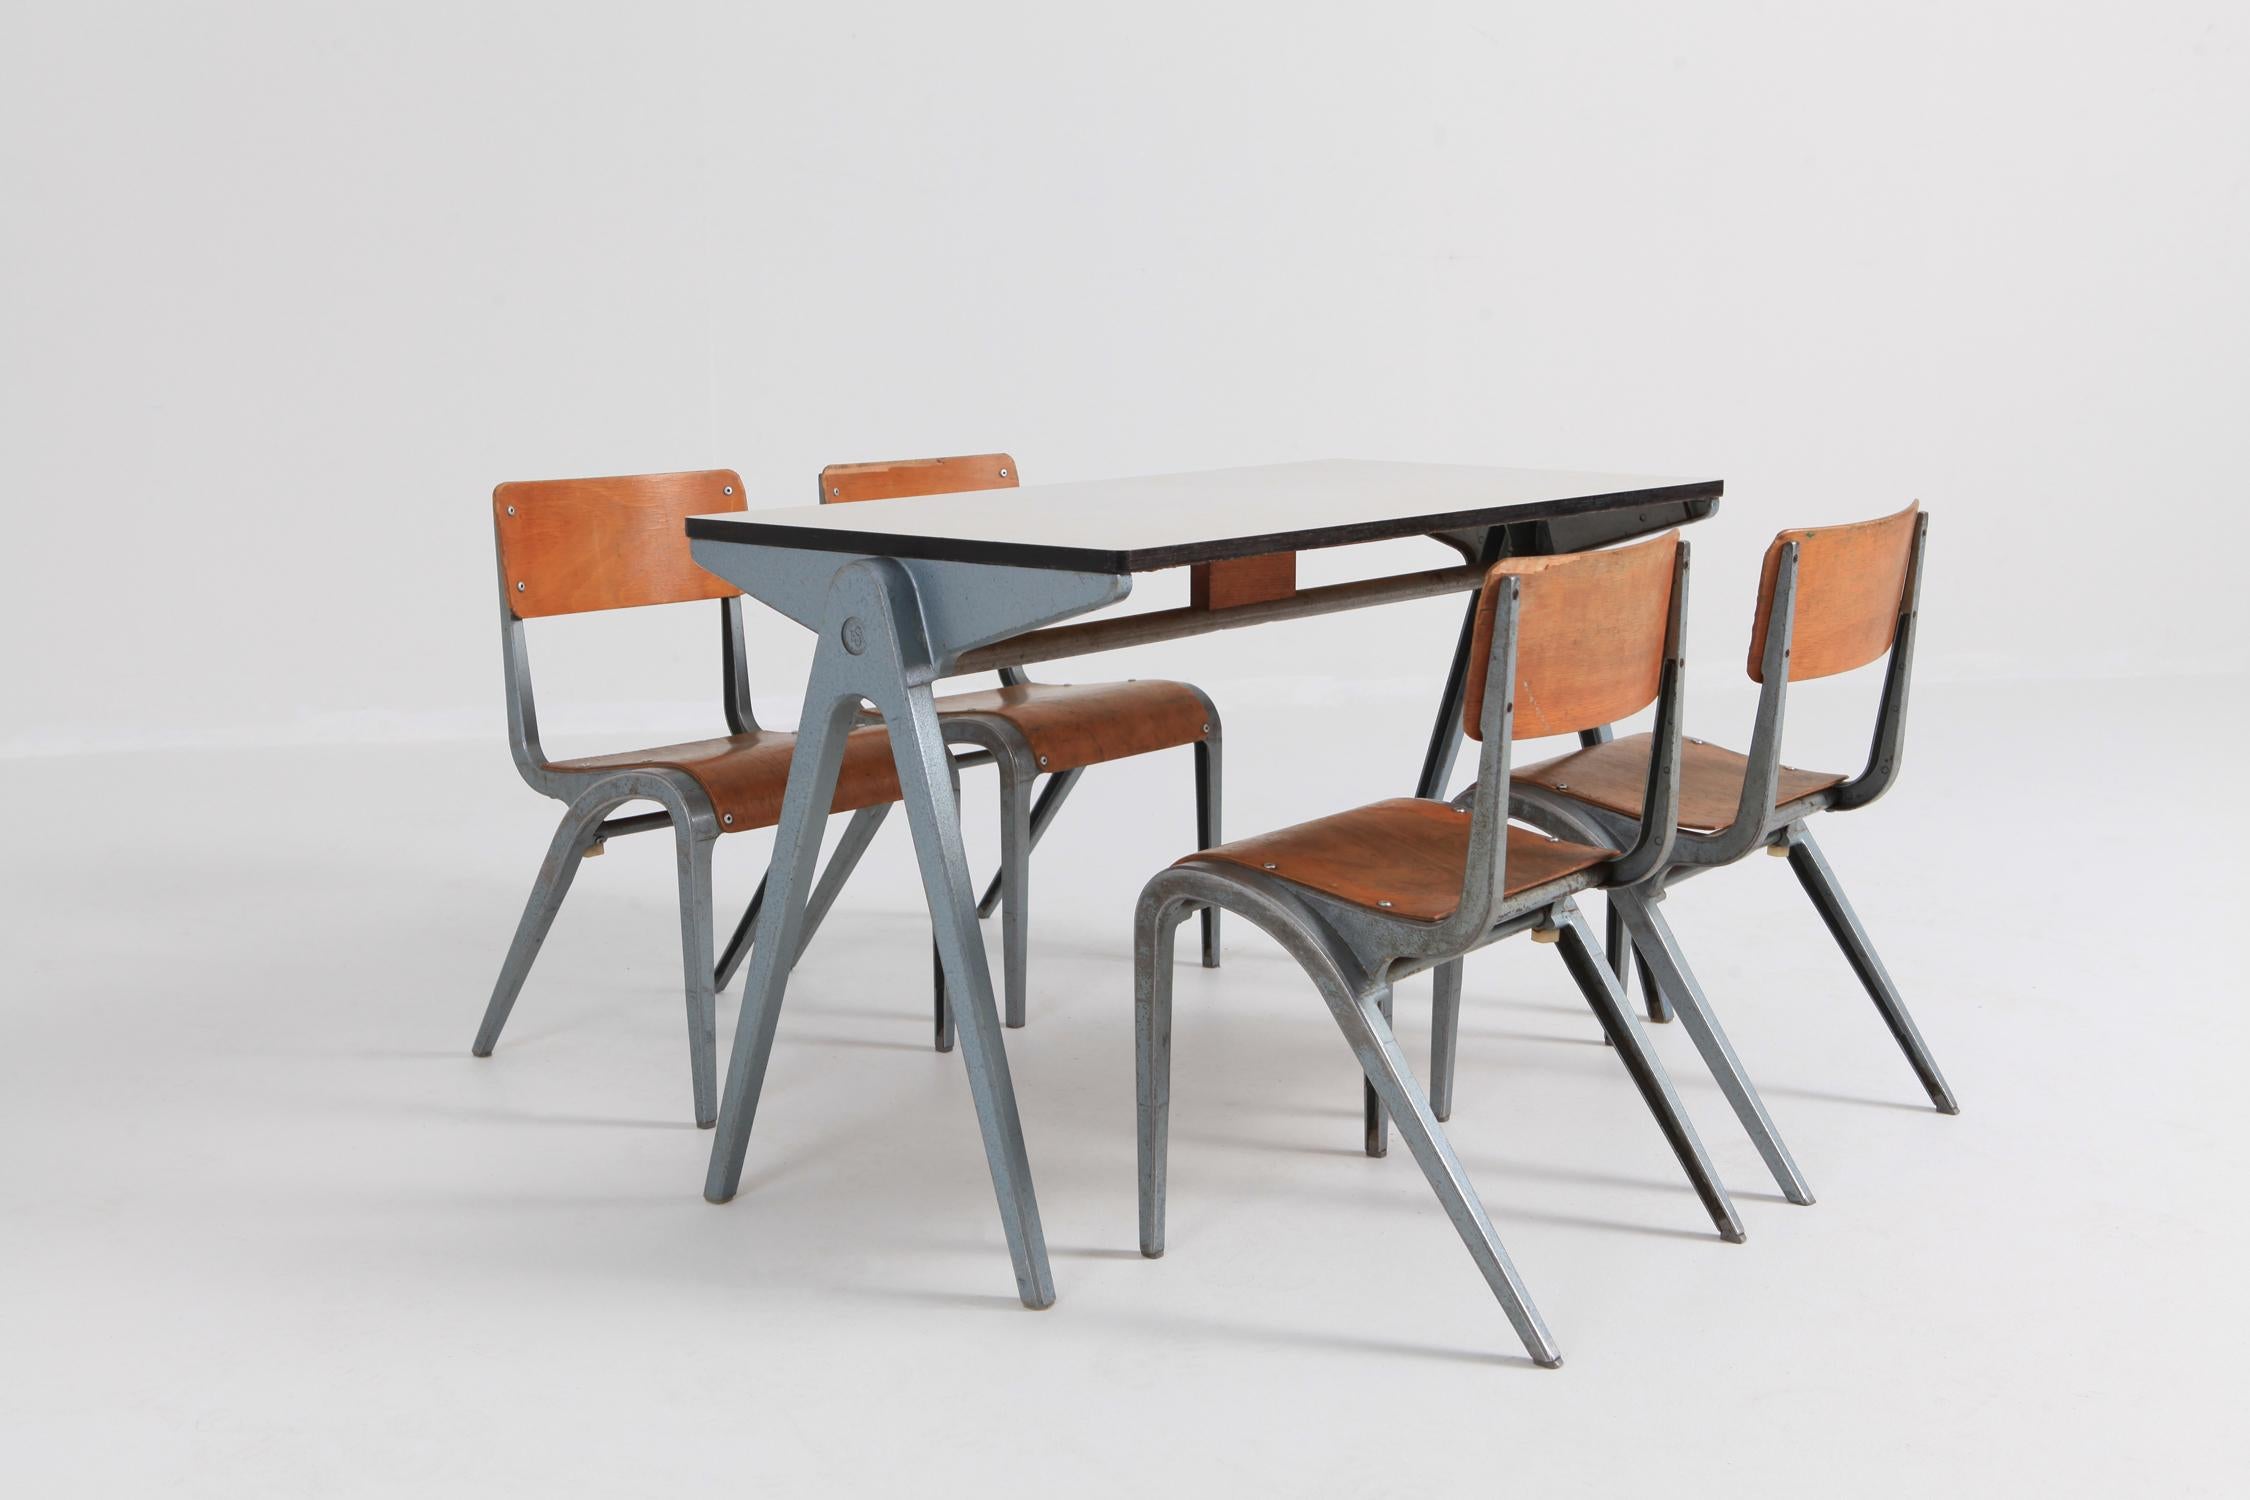 Mid-Century Modern Industrial children's furniture by James Leonard. Bent plywood seating and cast aluminum frame. UK, 1948 Quite rare to have a set of 4 chairs and table available
Would fit well in a Jean Prouvé, Wim Rietveld inspired minimal